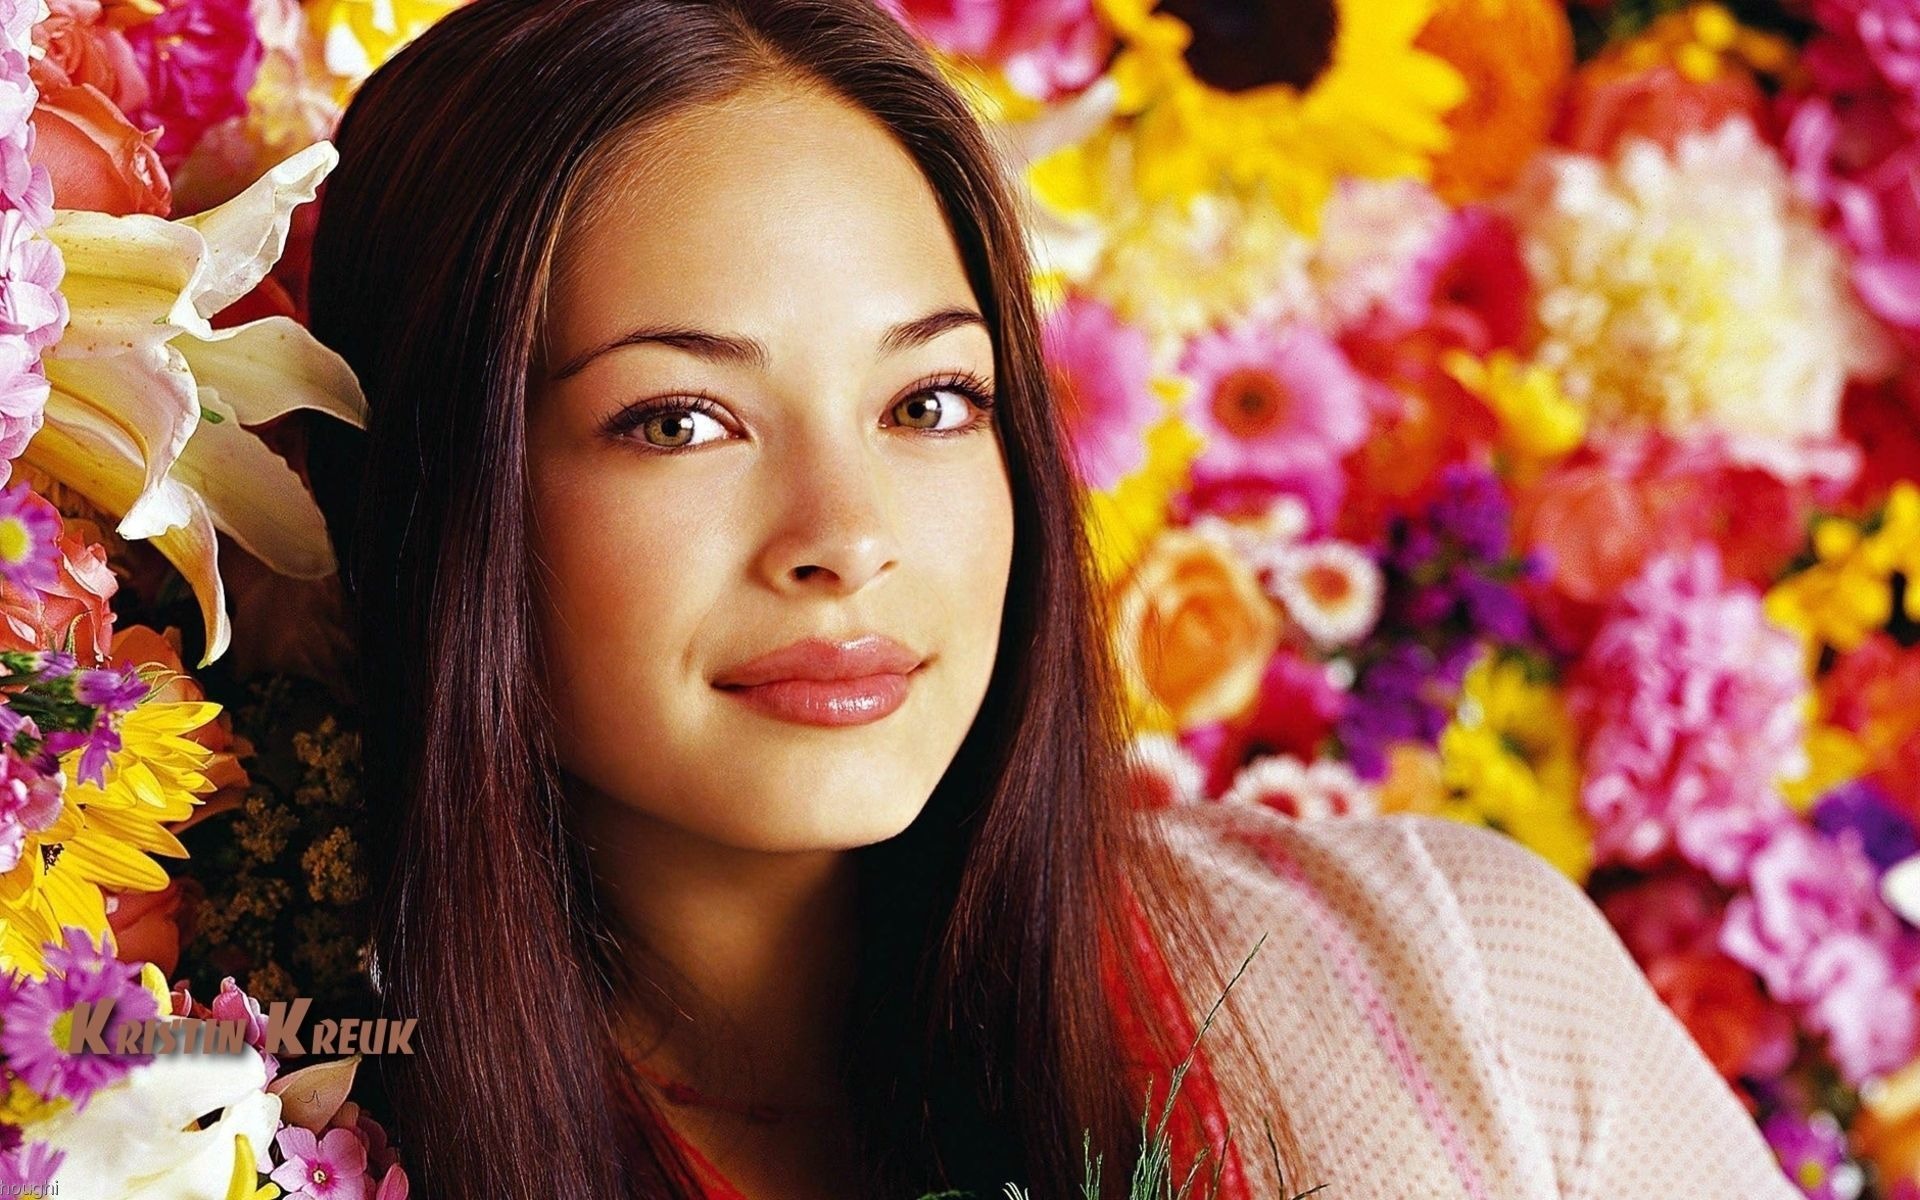 Kristin Kreuk #006 - 1920x1200 Wallpapers Pictures Photos Images